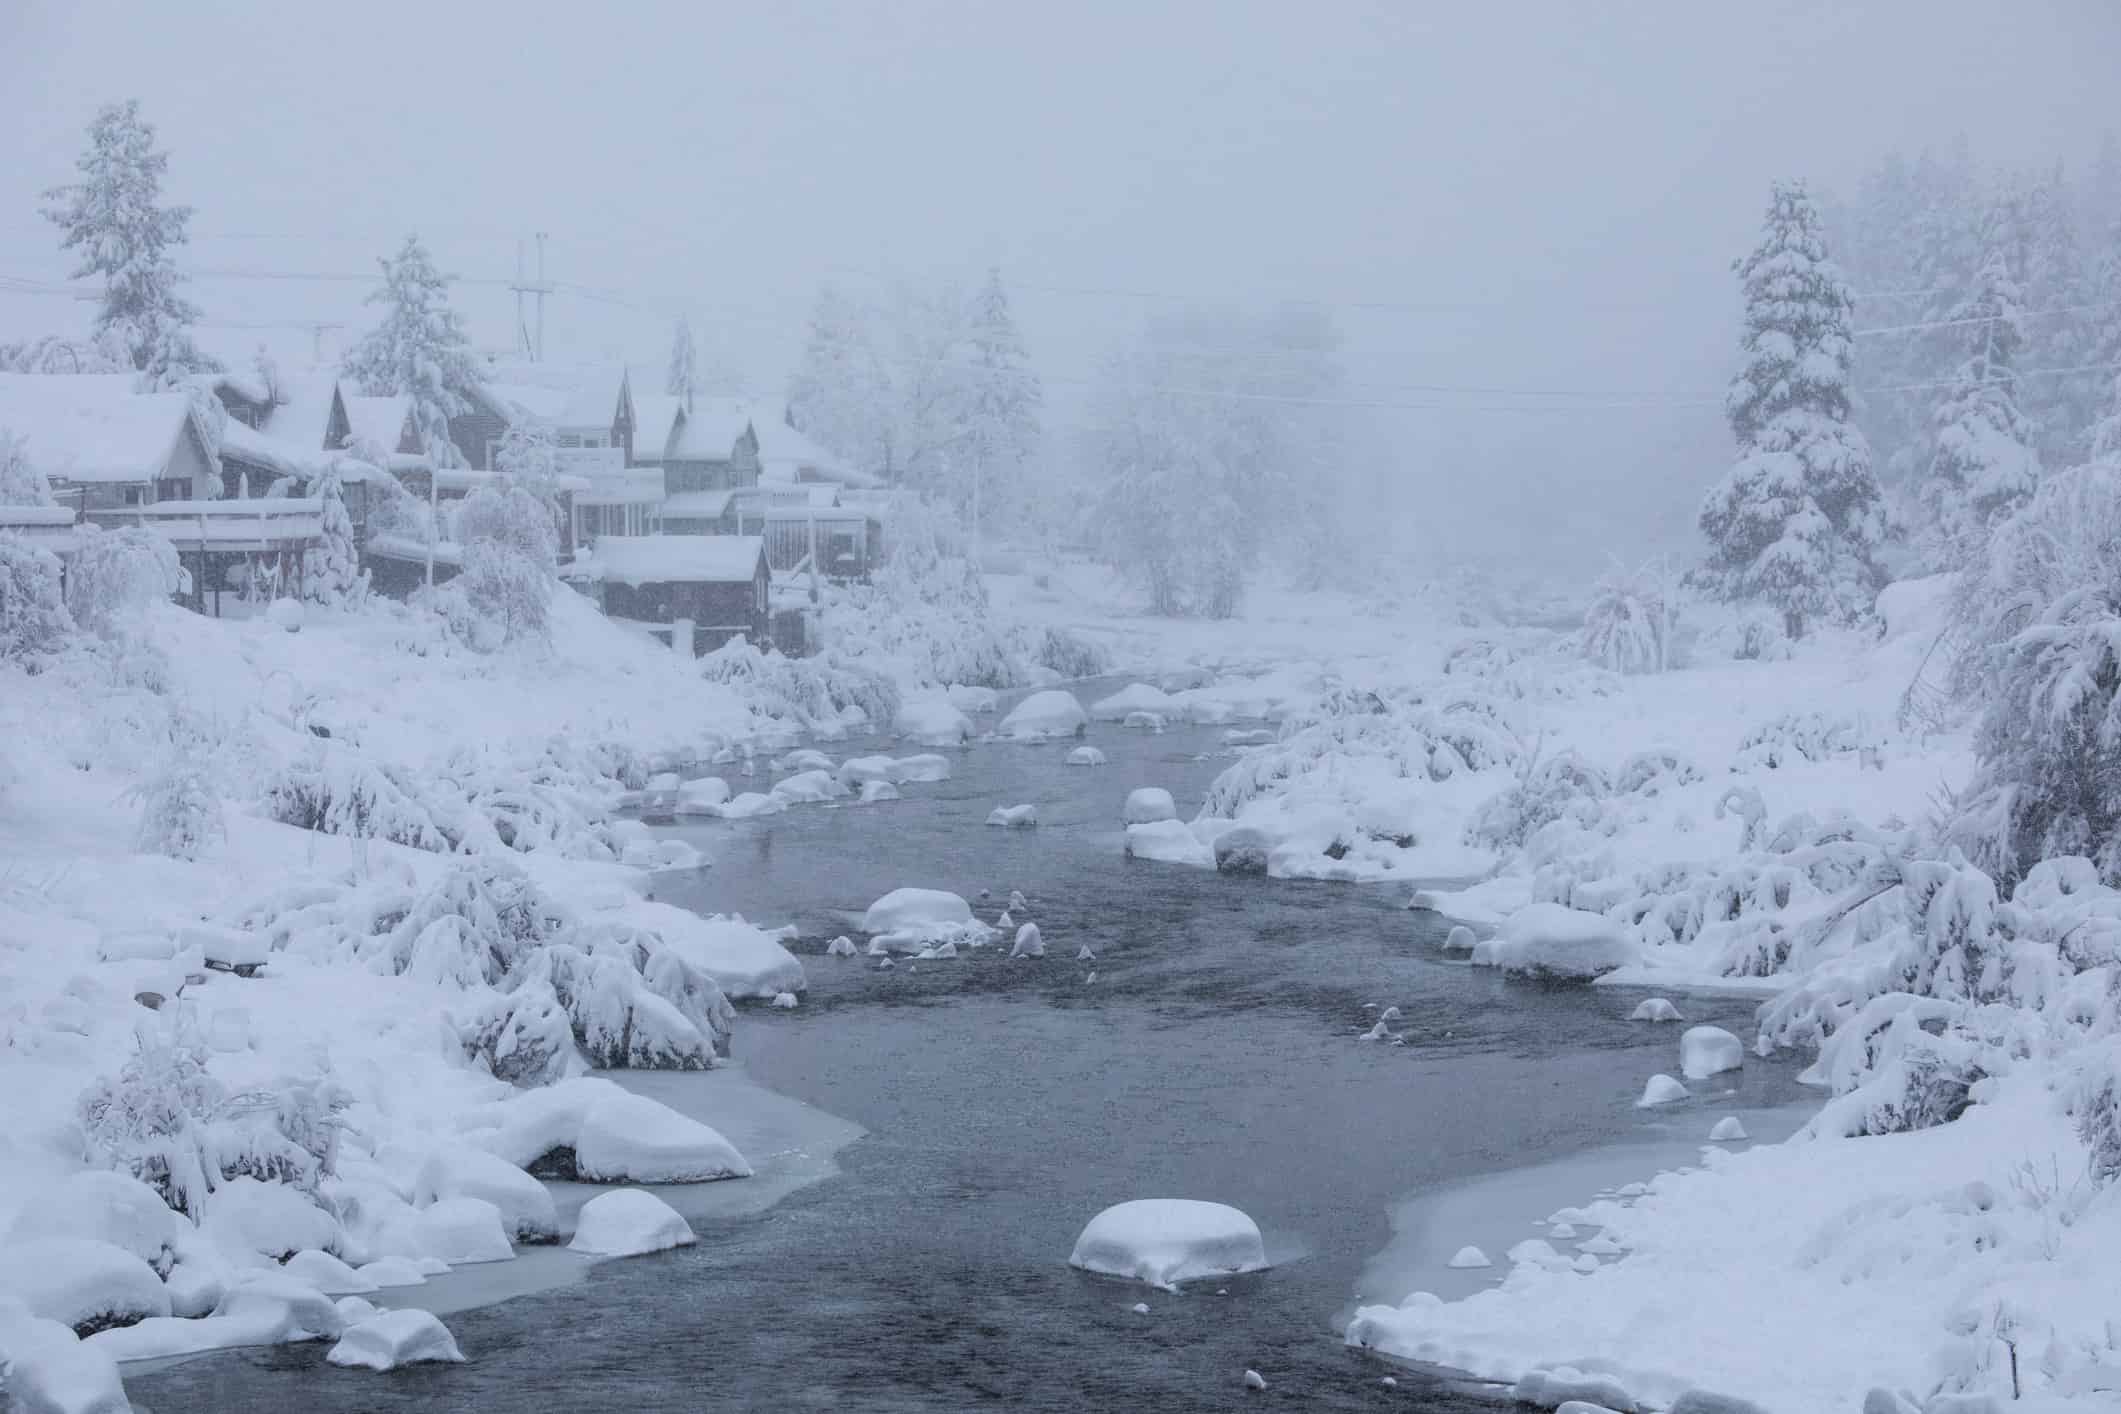 Truckee River, California during blizzard